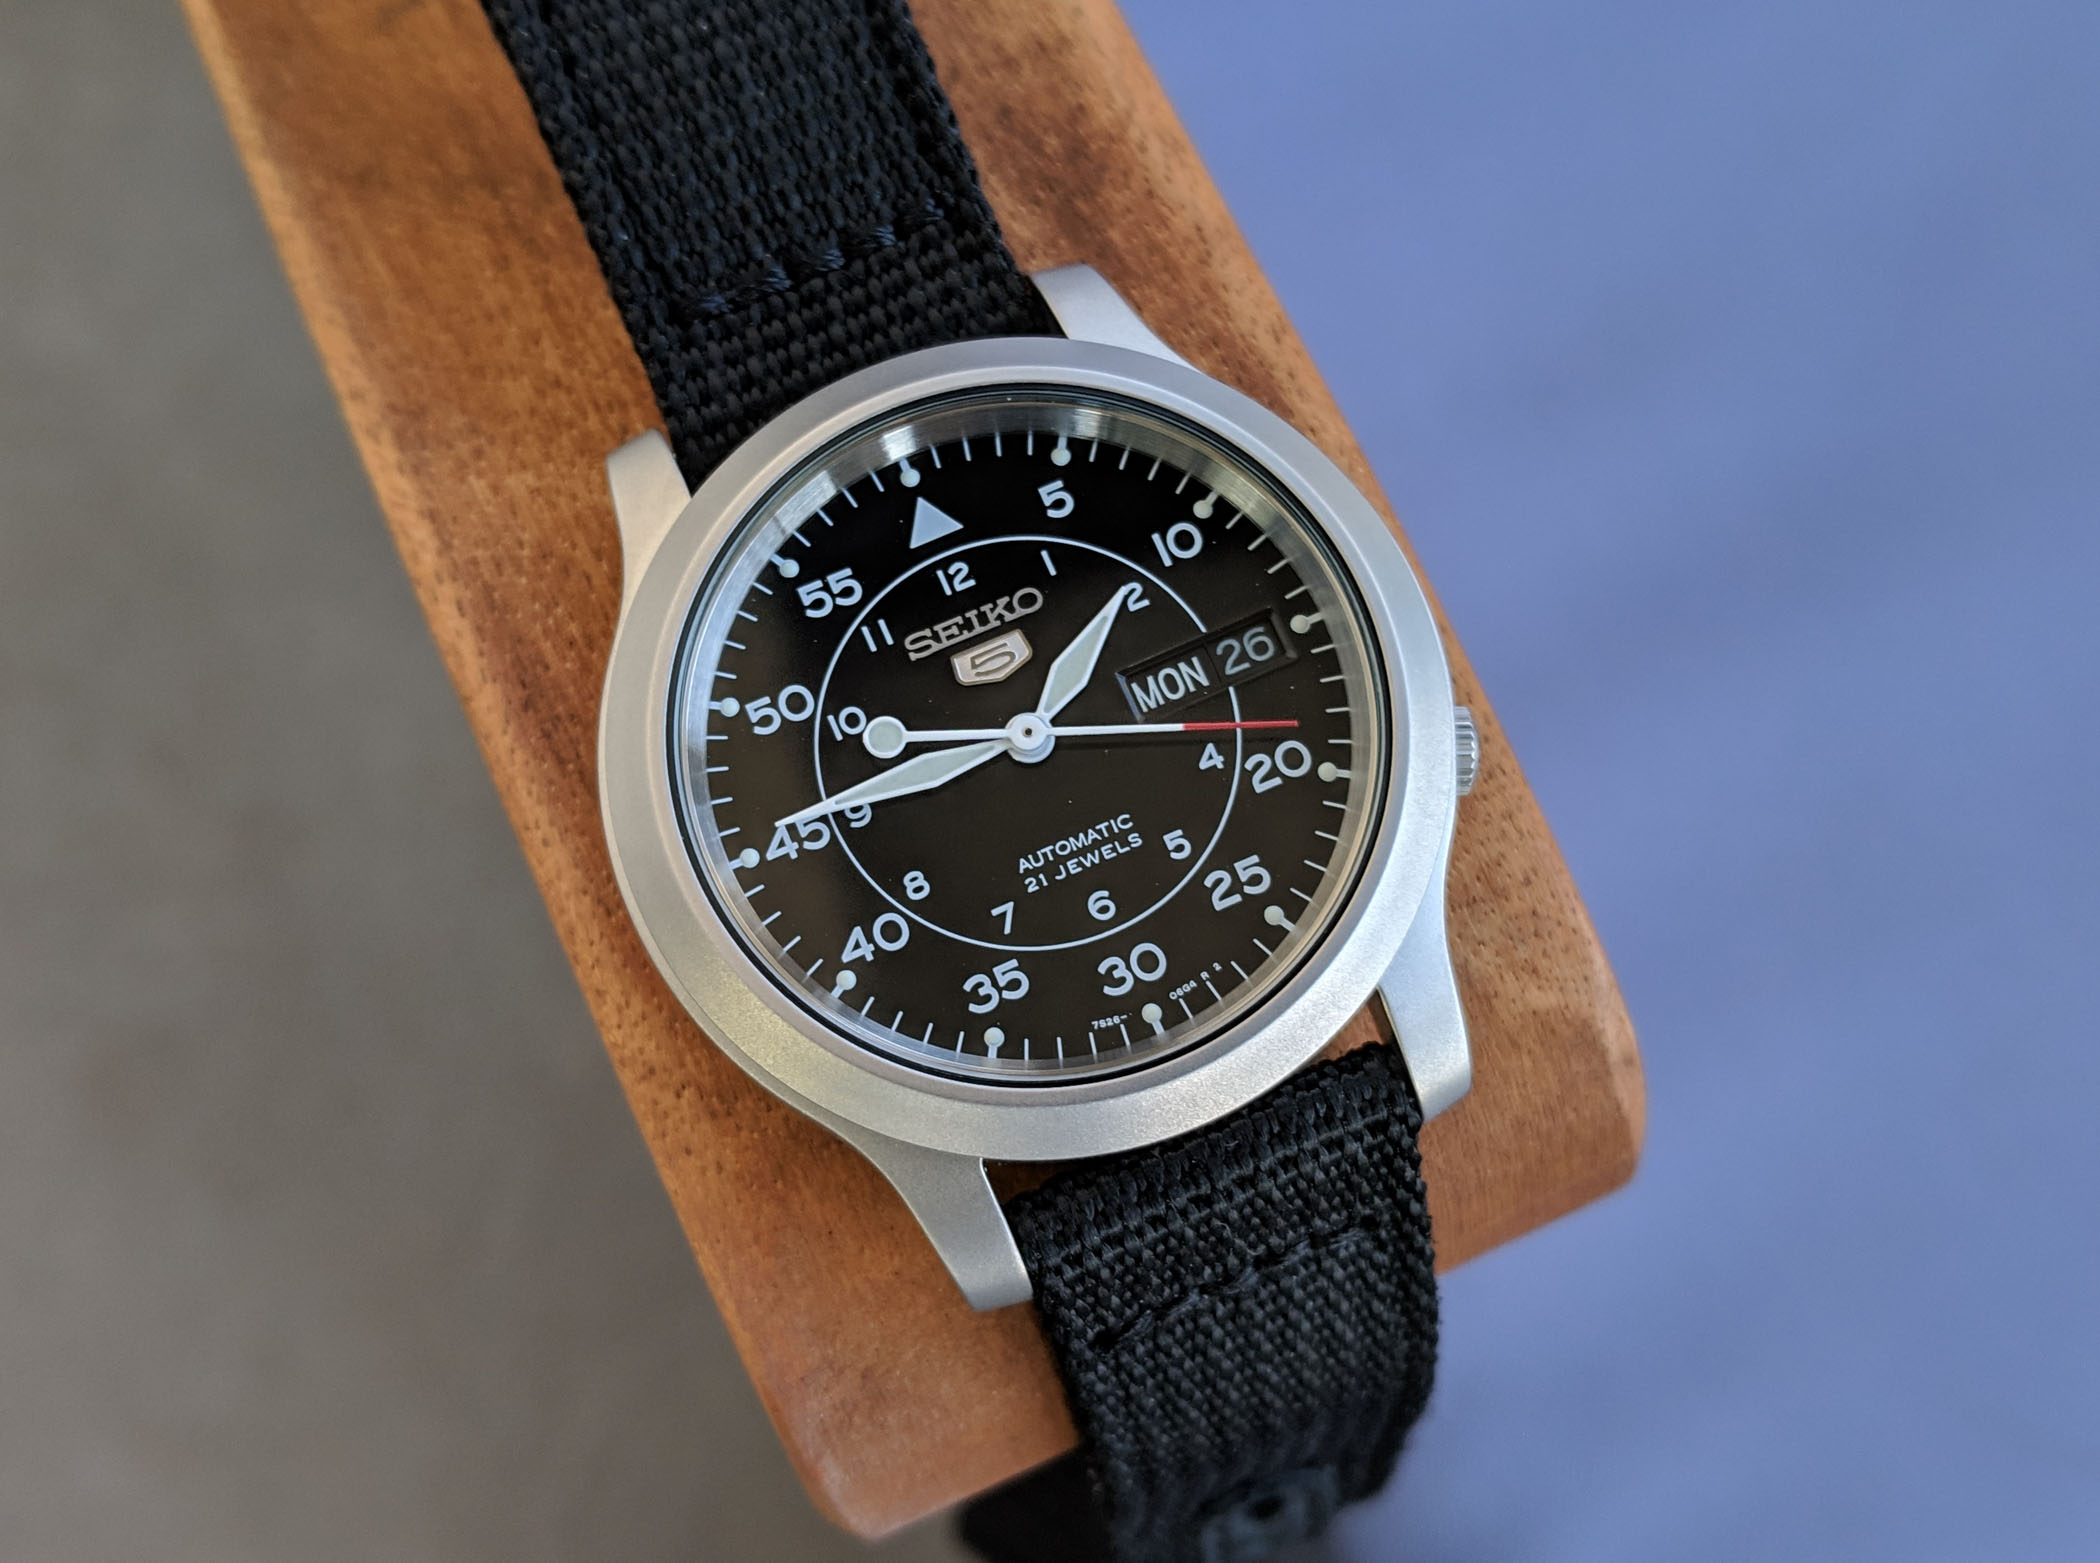 Seiko 5 SNK809 Review & Complete Guide